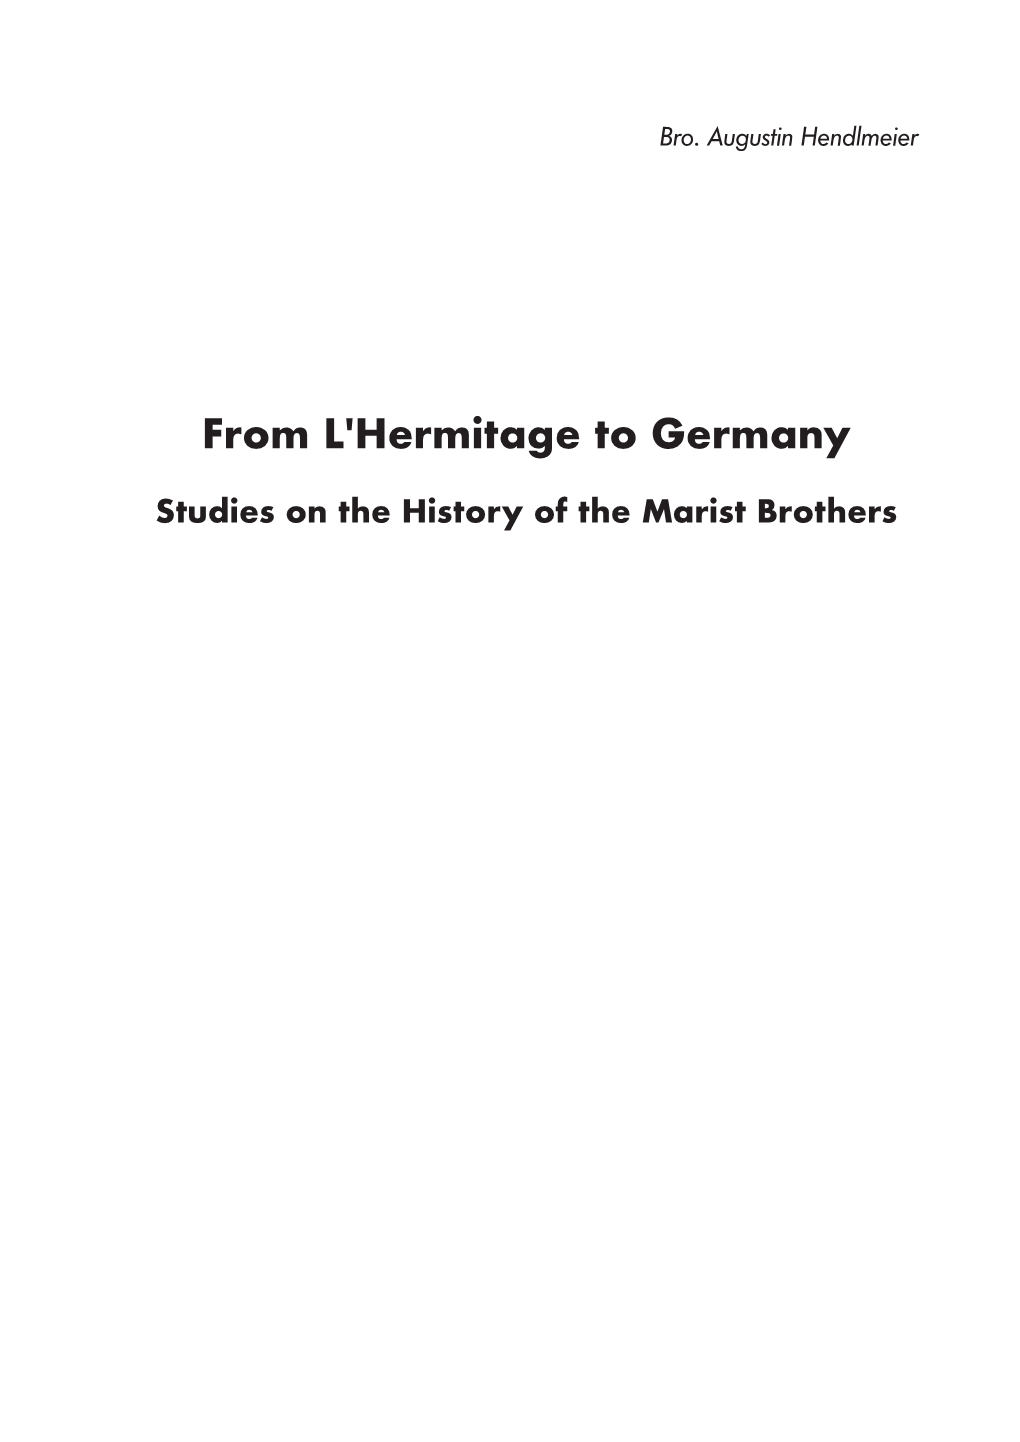 From L'hermitage to Germany